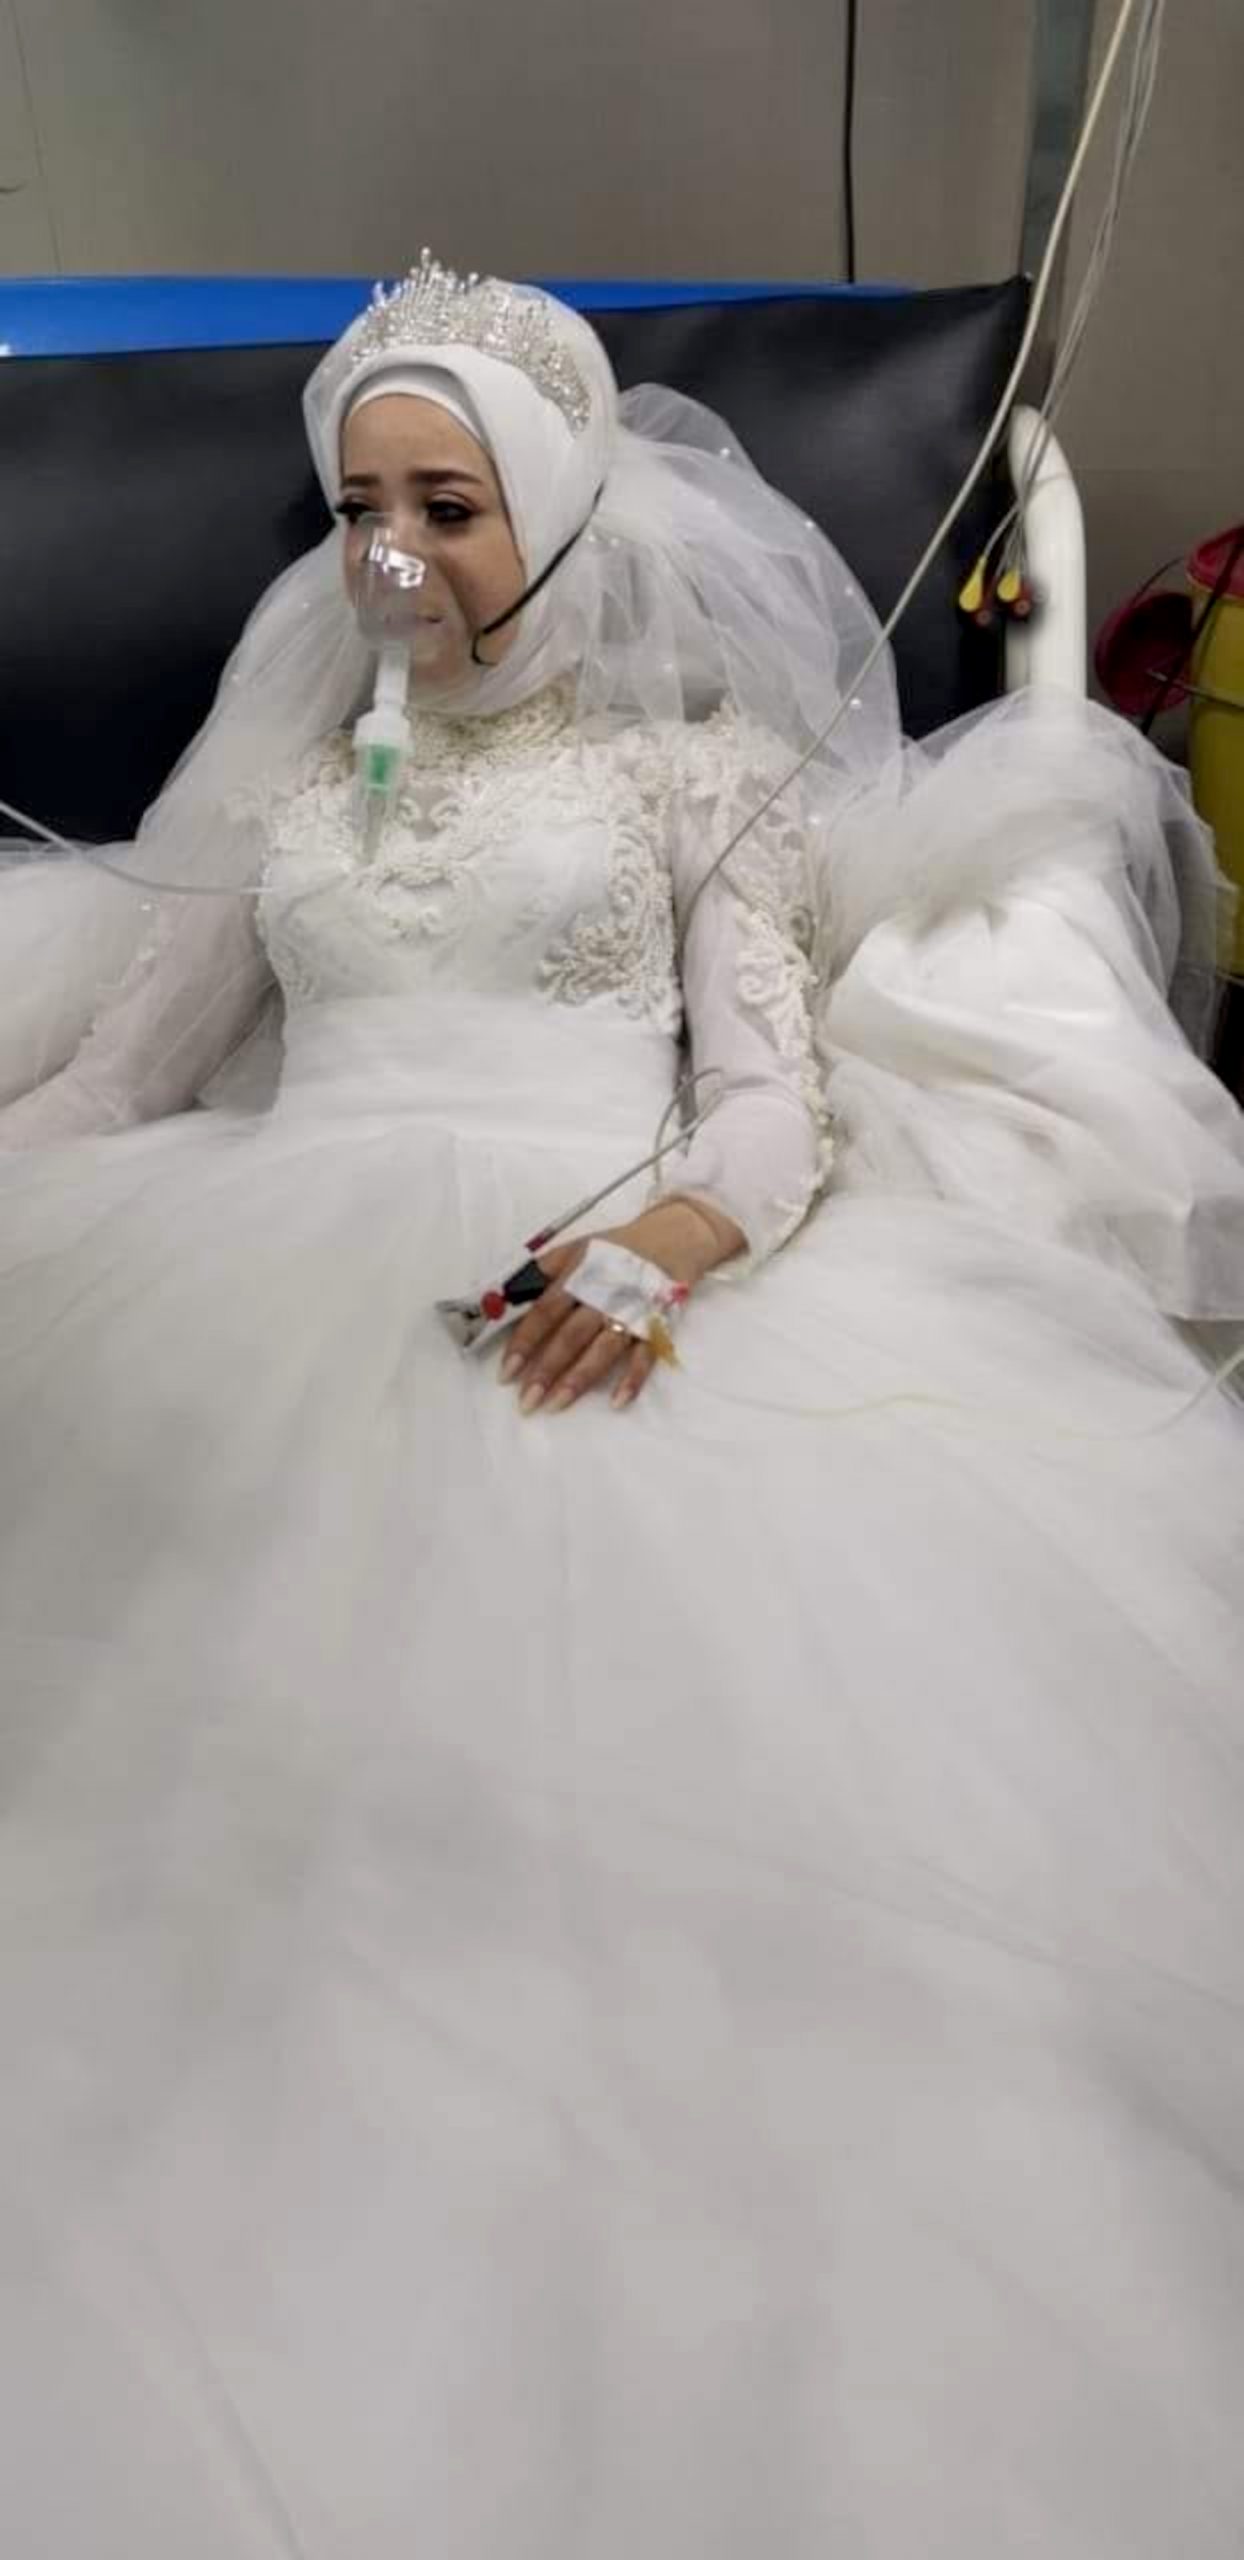 Read more about the article Hijab Model Spends Wedding Night In Hospital As Gas Leak Cuts Short Nuptials After 30 Mins